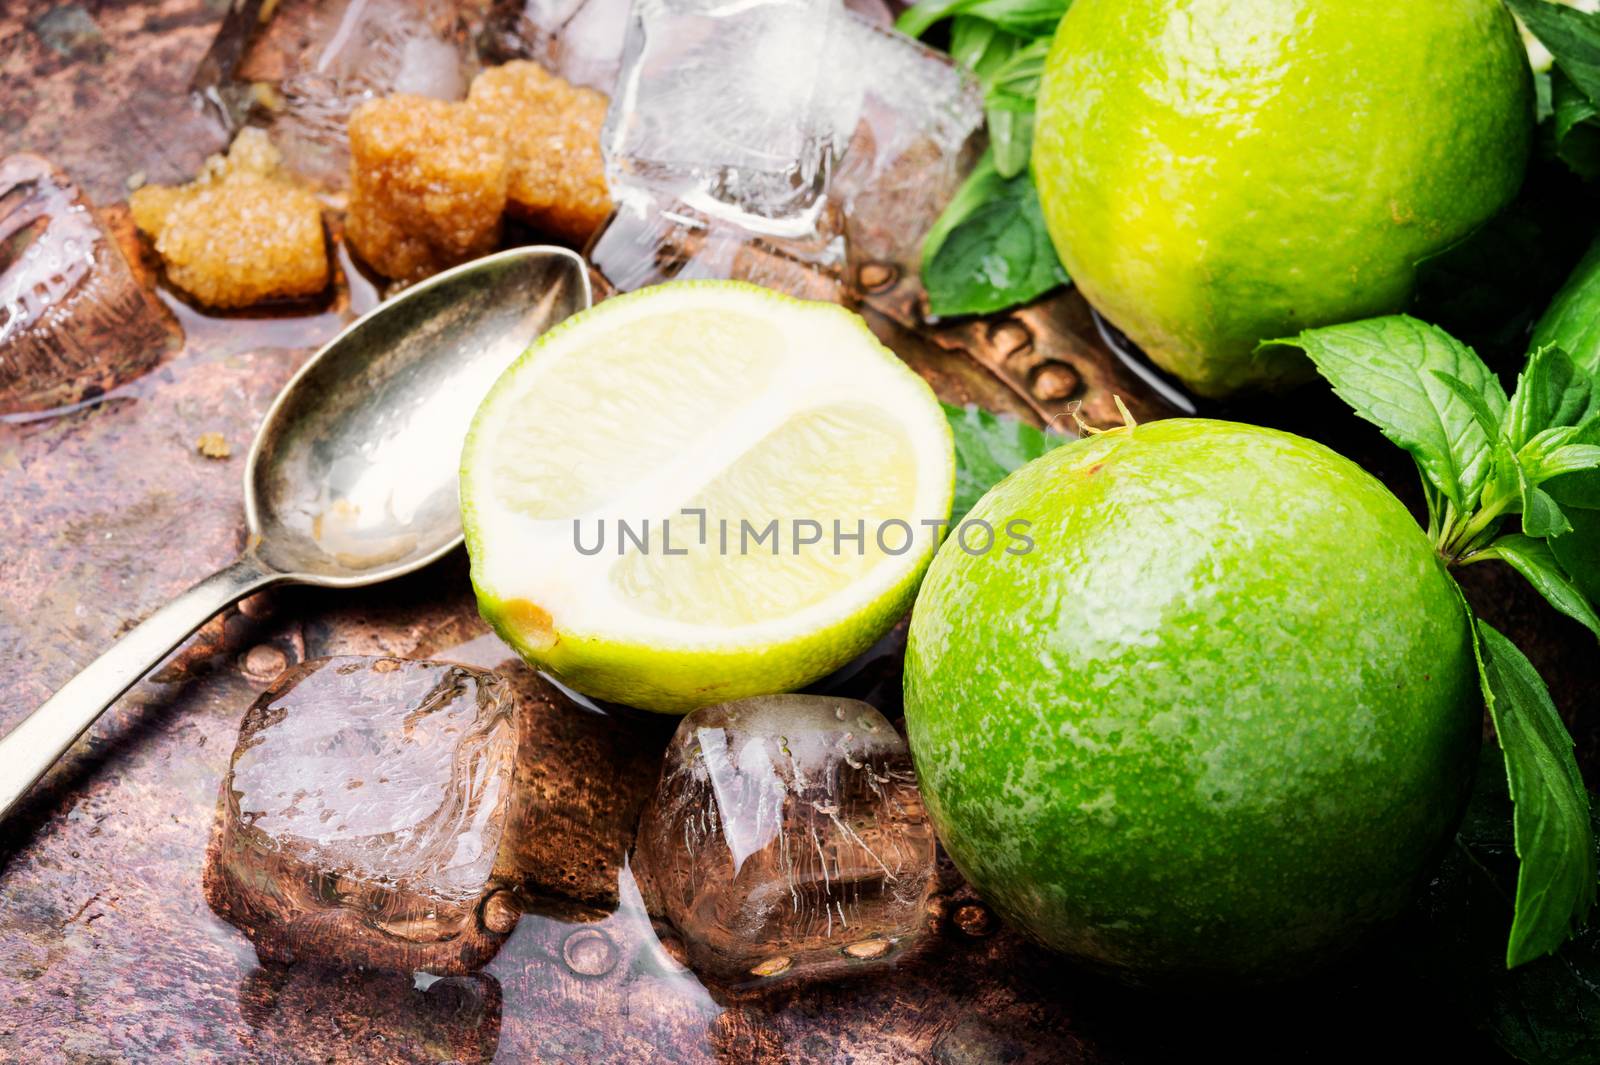 Mojito ingredients. Lime, mint and cane sugar